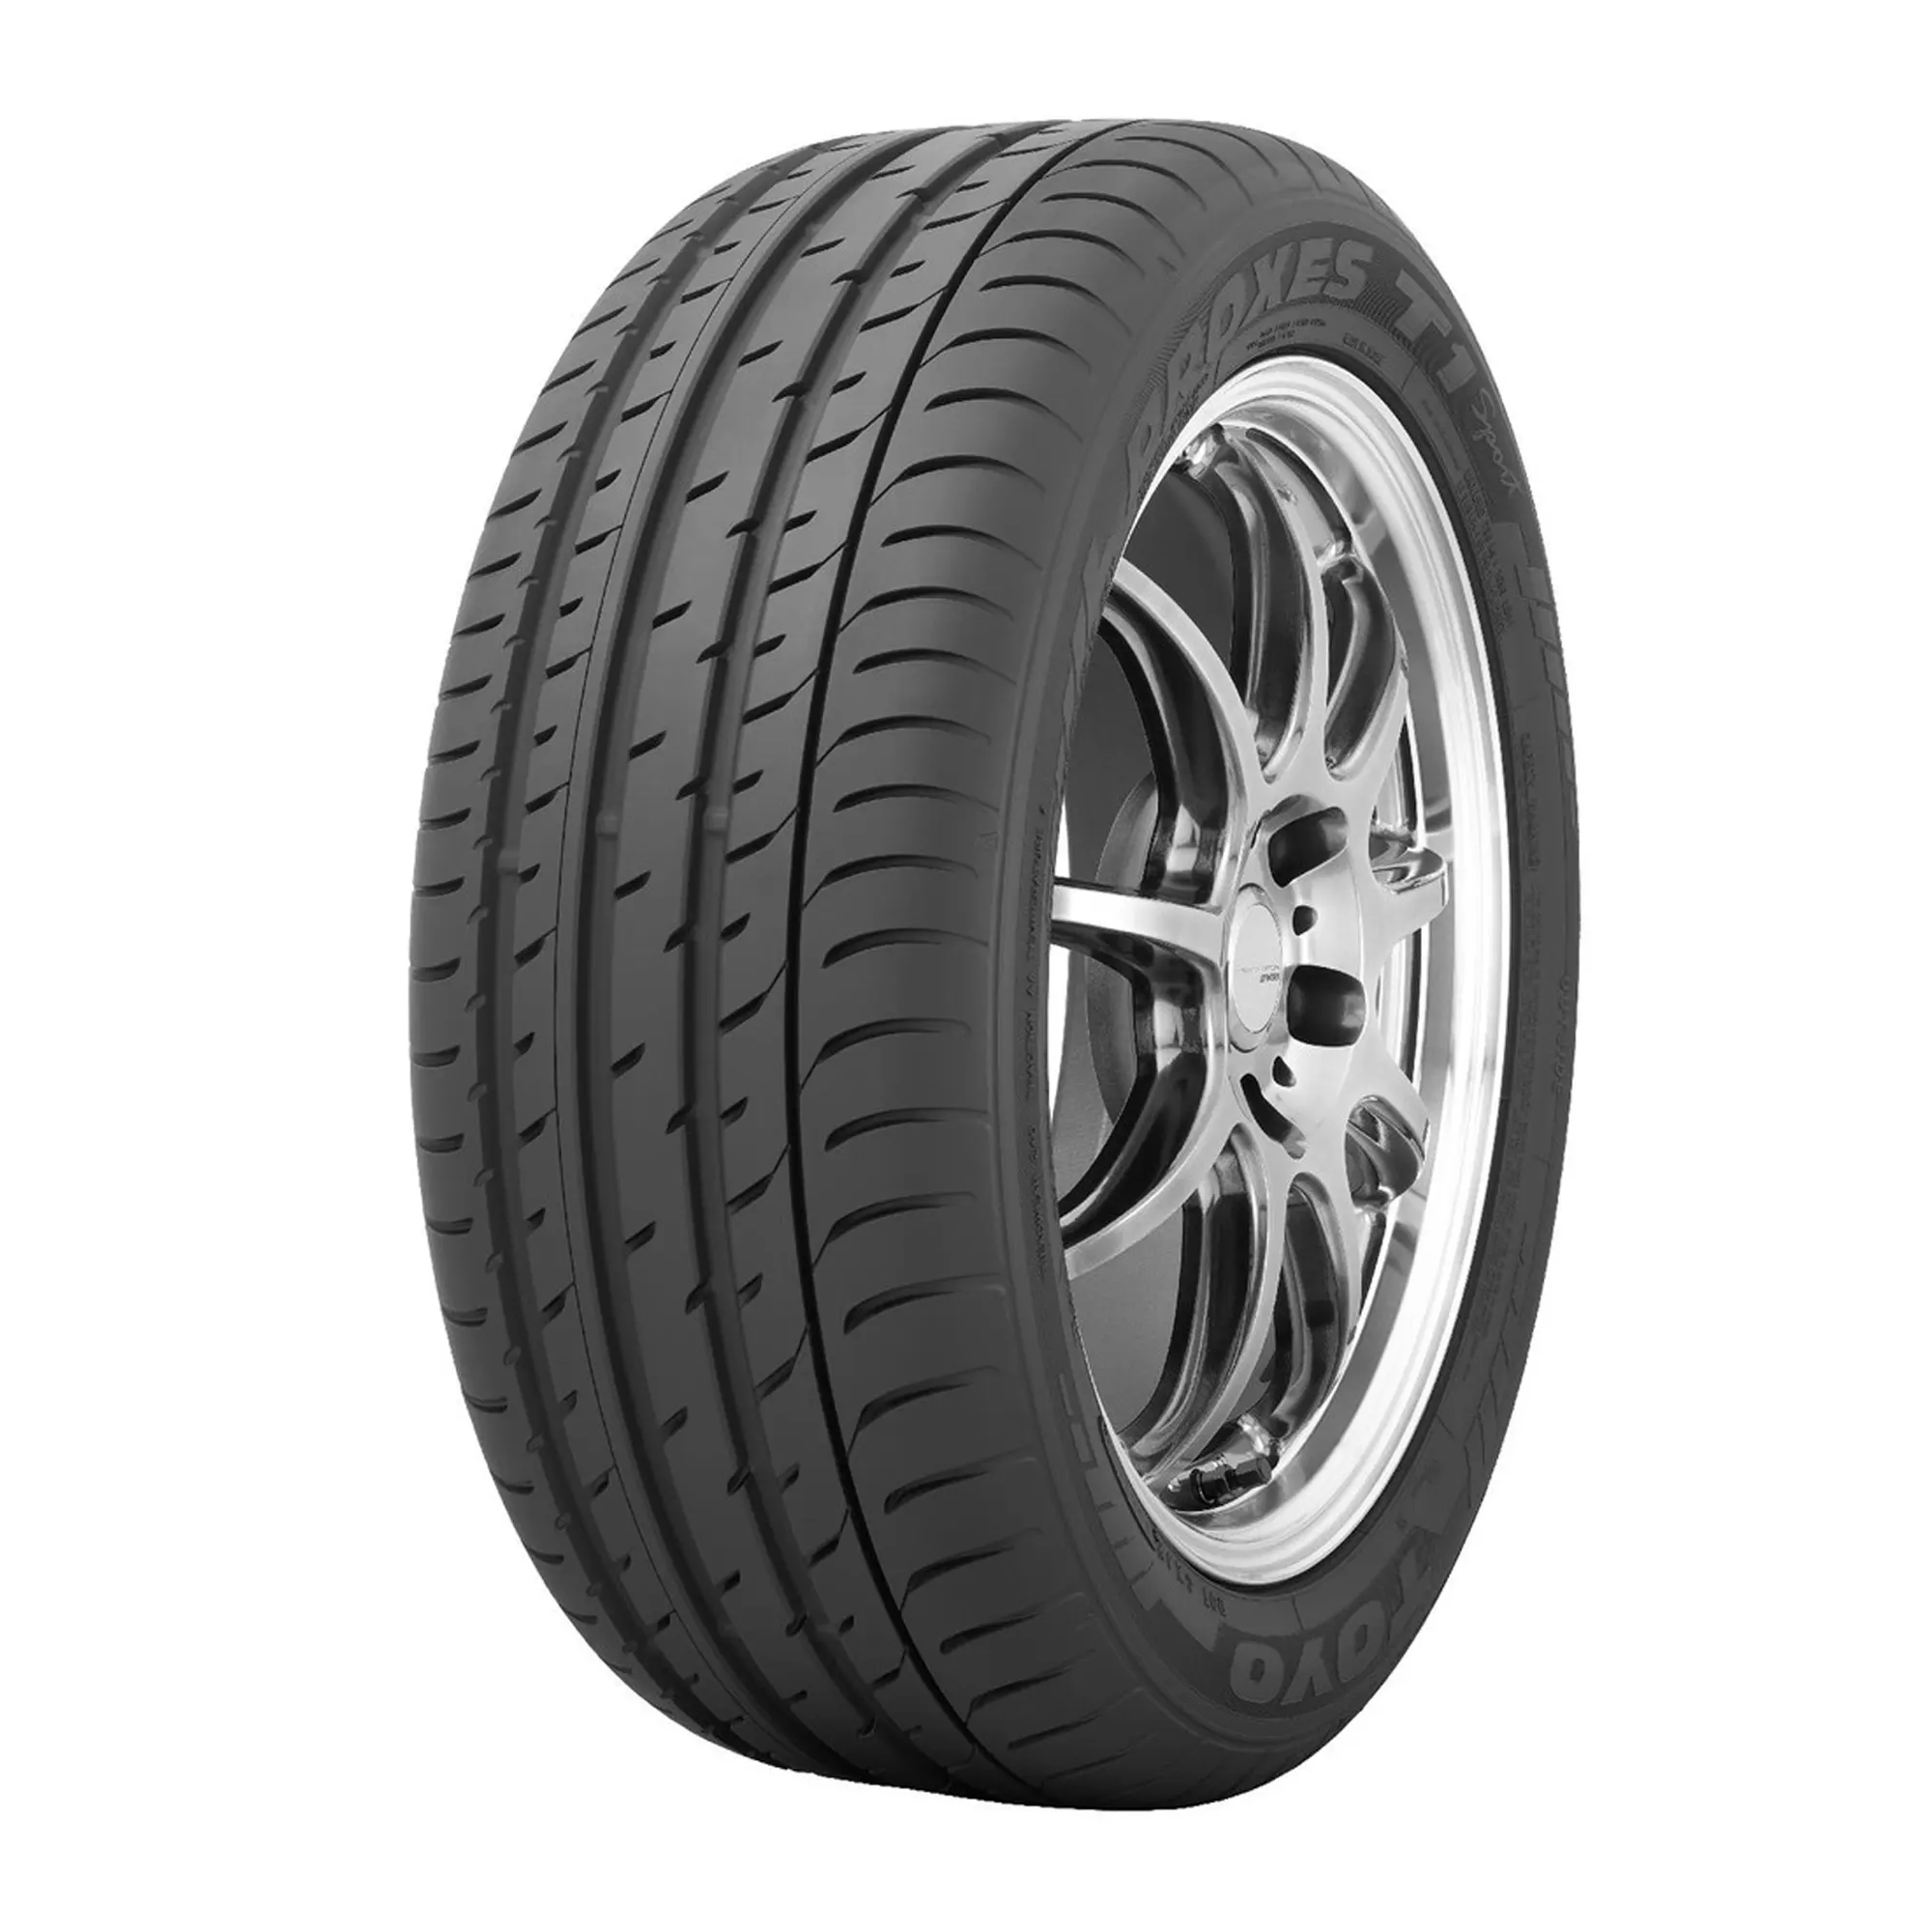 Шина 235/50R17 96Y Proxes T1 SPORT